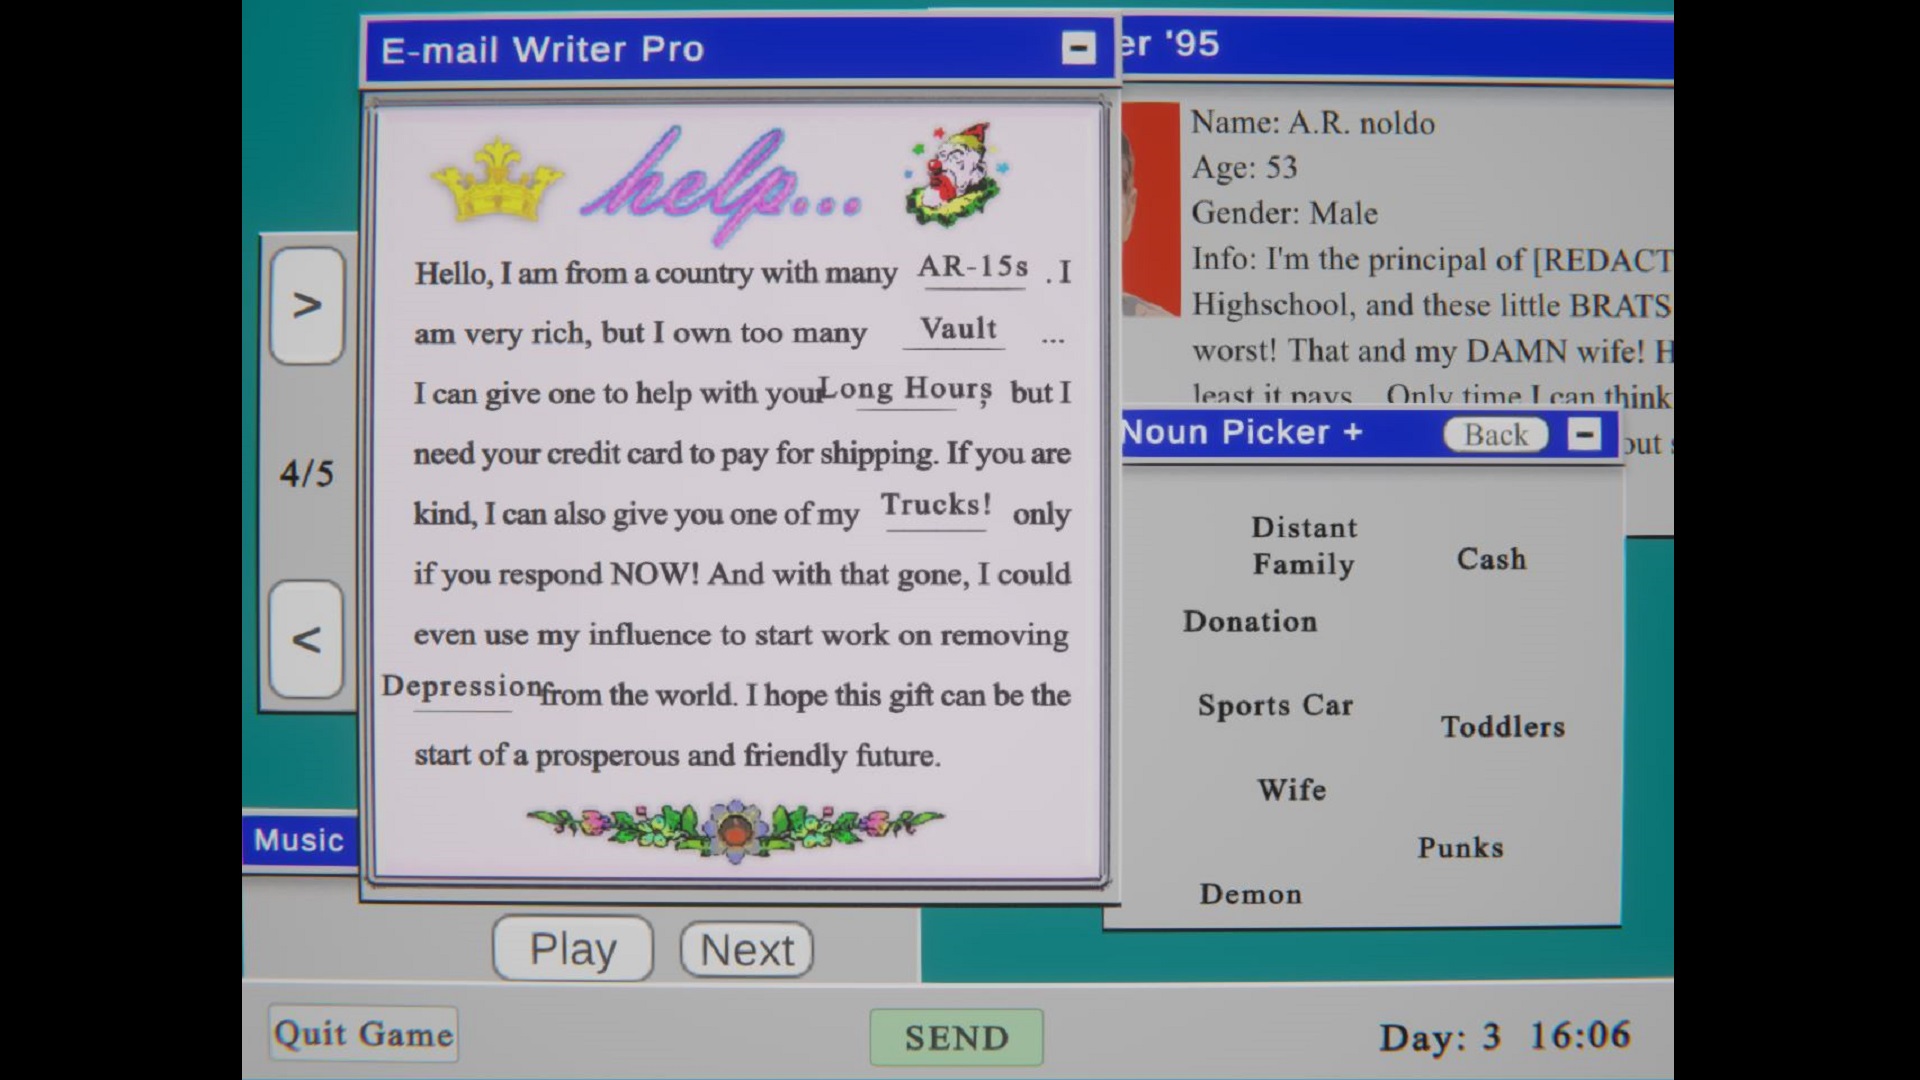 cdROM 480p hd - an image of an email template made on a 90's computer.